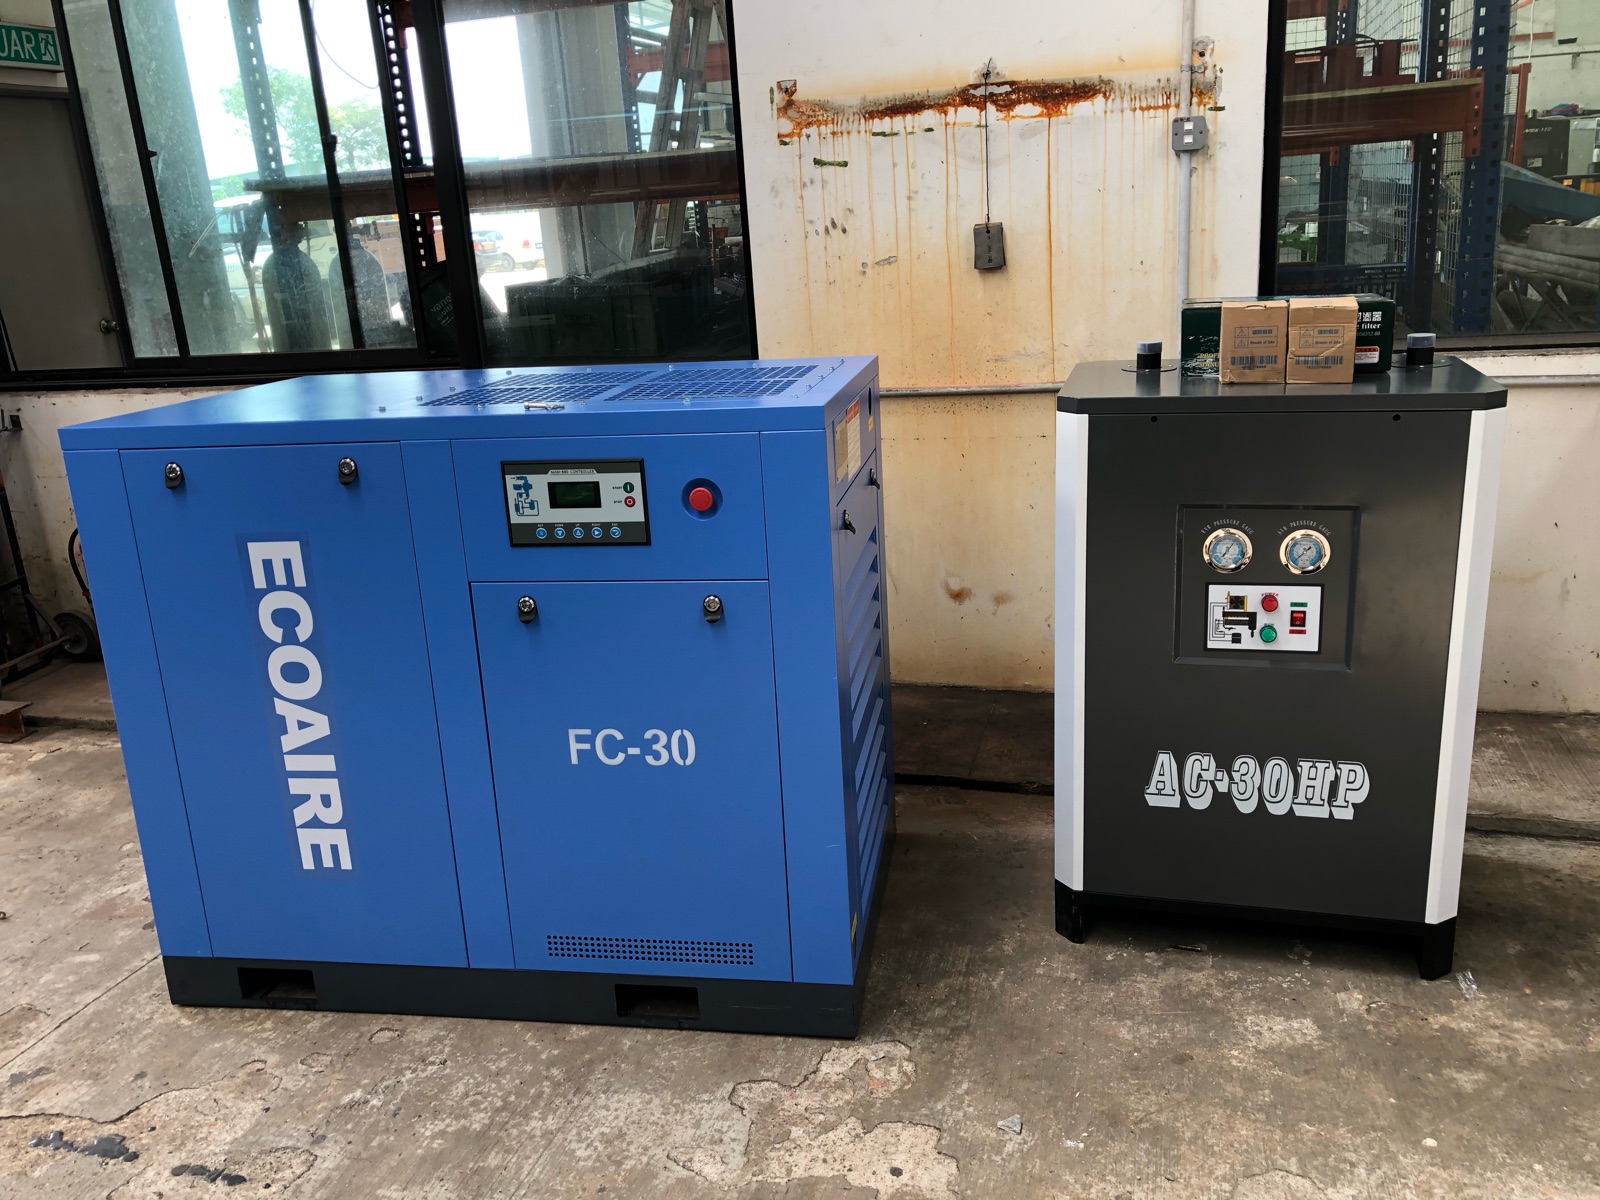 Waiting For Installation ECOAIRE Air Compressor FC-30 & AC Air Dryer AC-30HP 